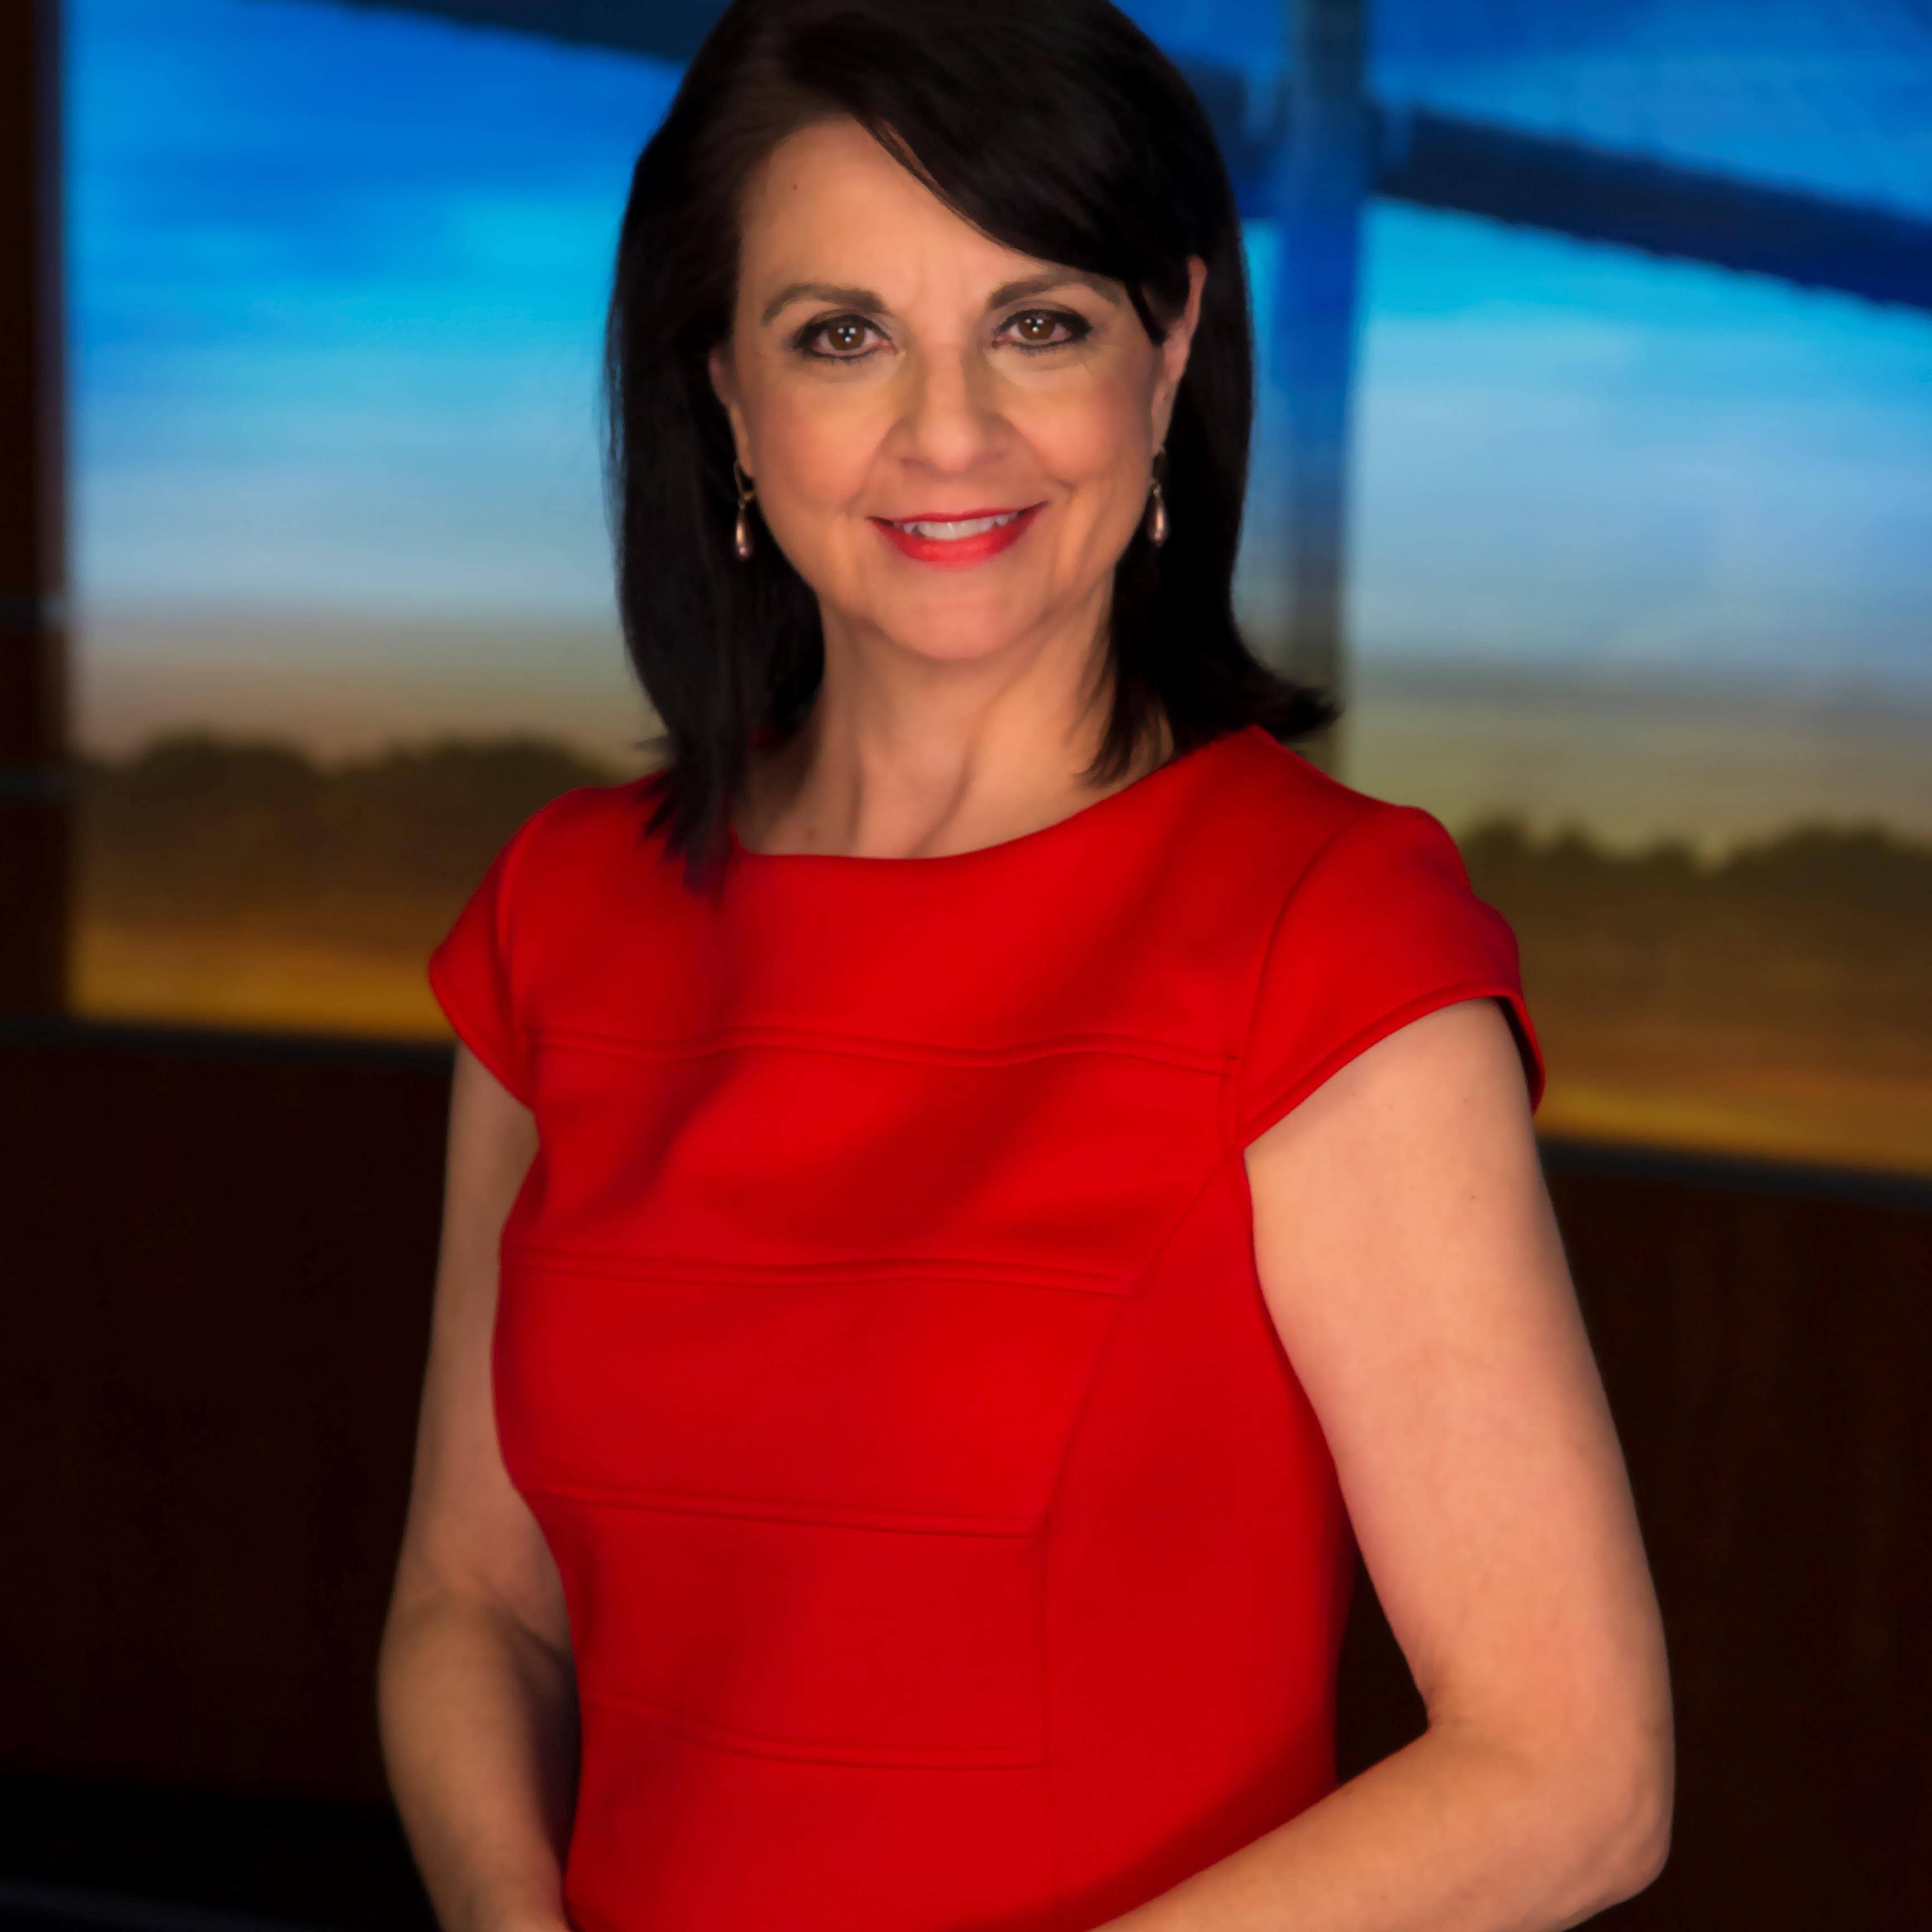 Host for Mid Morning Live at 10am weekdays. Anchor for THE News at Noon, THE News Live at 5 and THE News New at 6 on WTOC-TV.